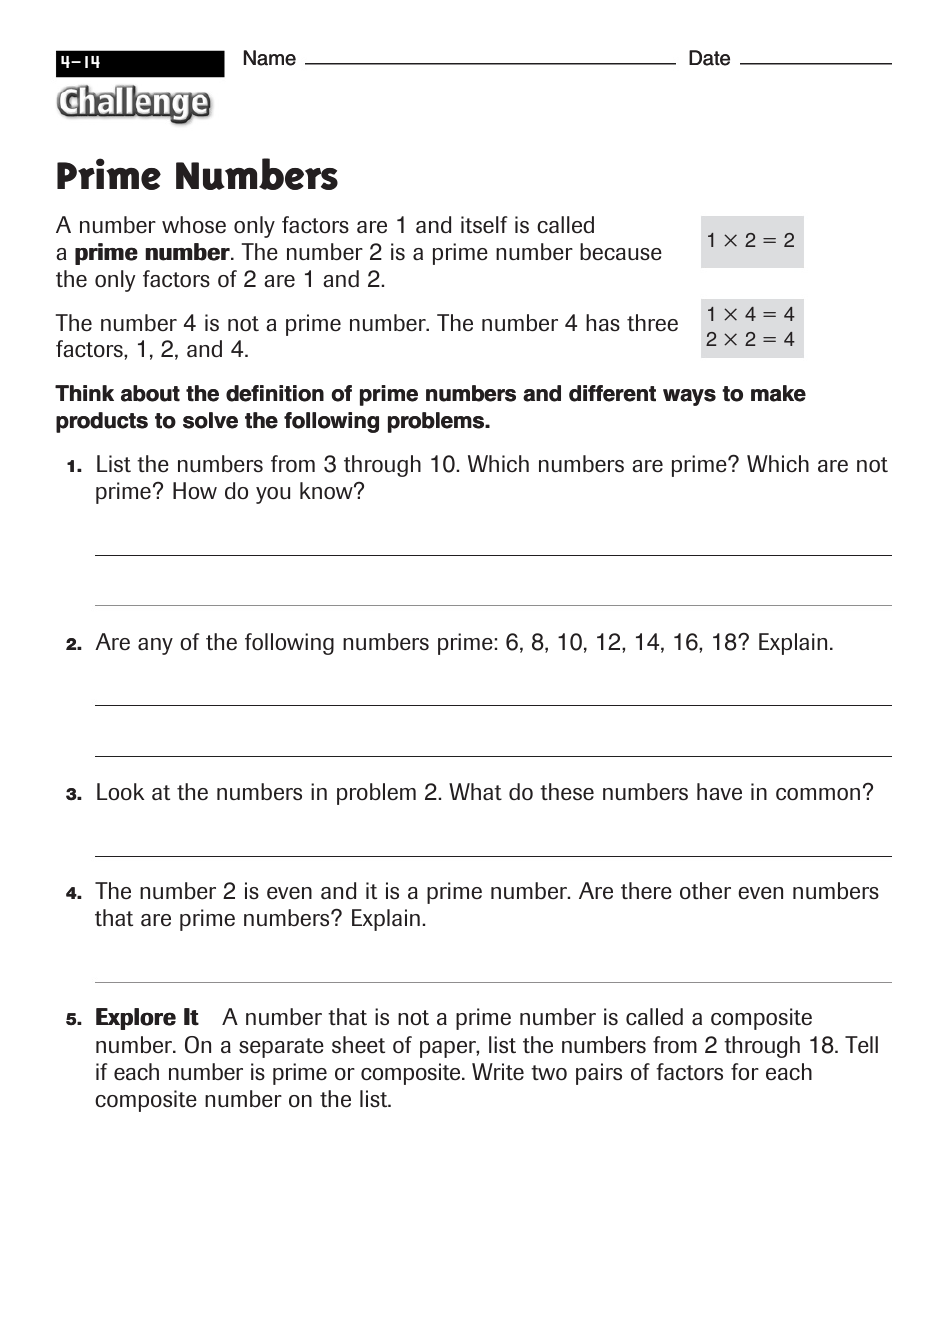 Prime Numbers Worksheet With Answers - 21-121 Challenge Download For Prime And Composite Numbers Worksheet